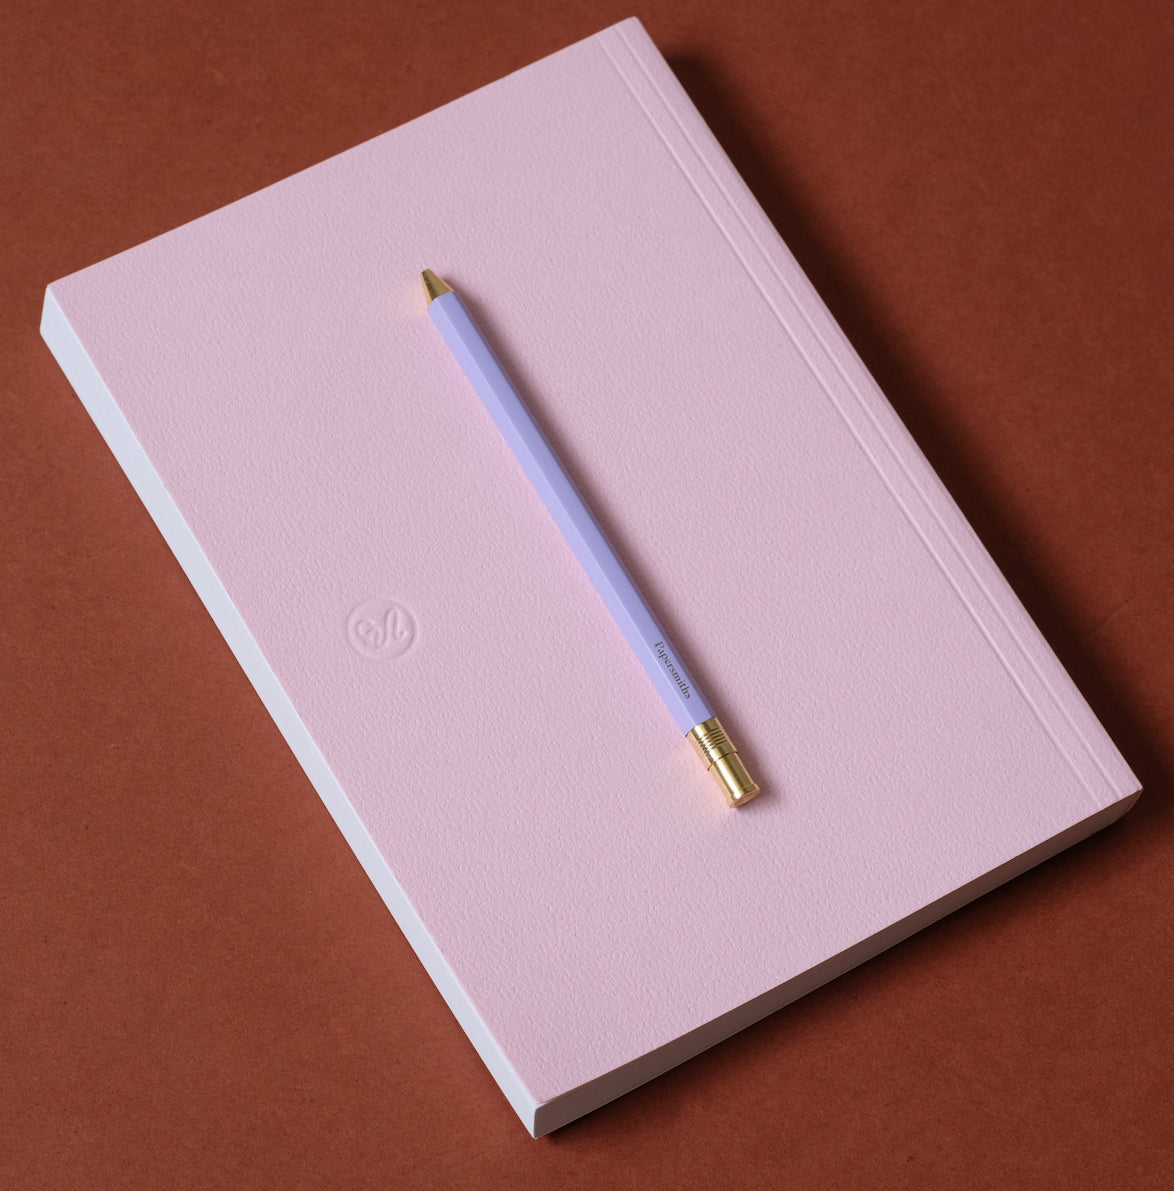 Cowrie Notebook and Pen Duo - Everyday Pen / Dot Grid Paper